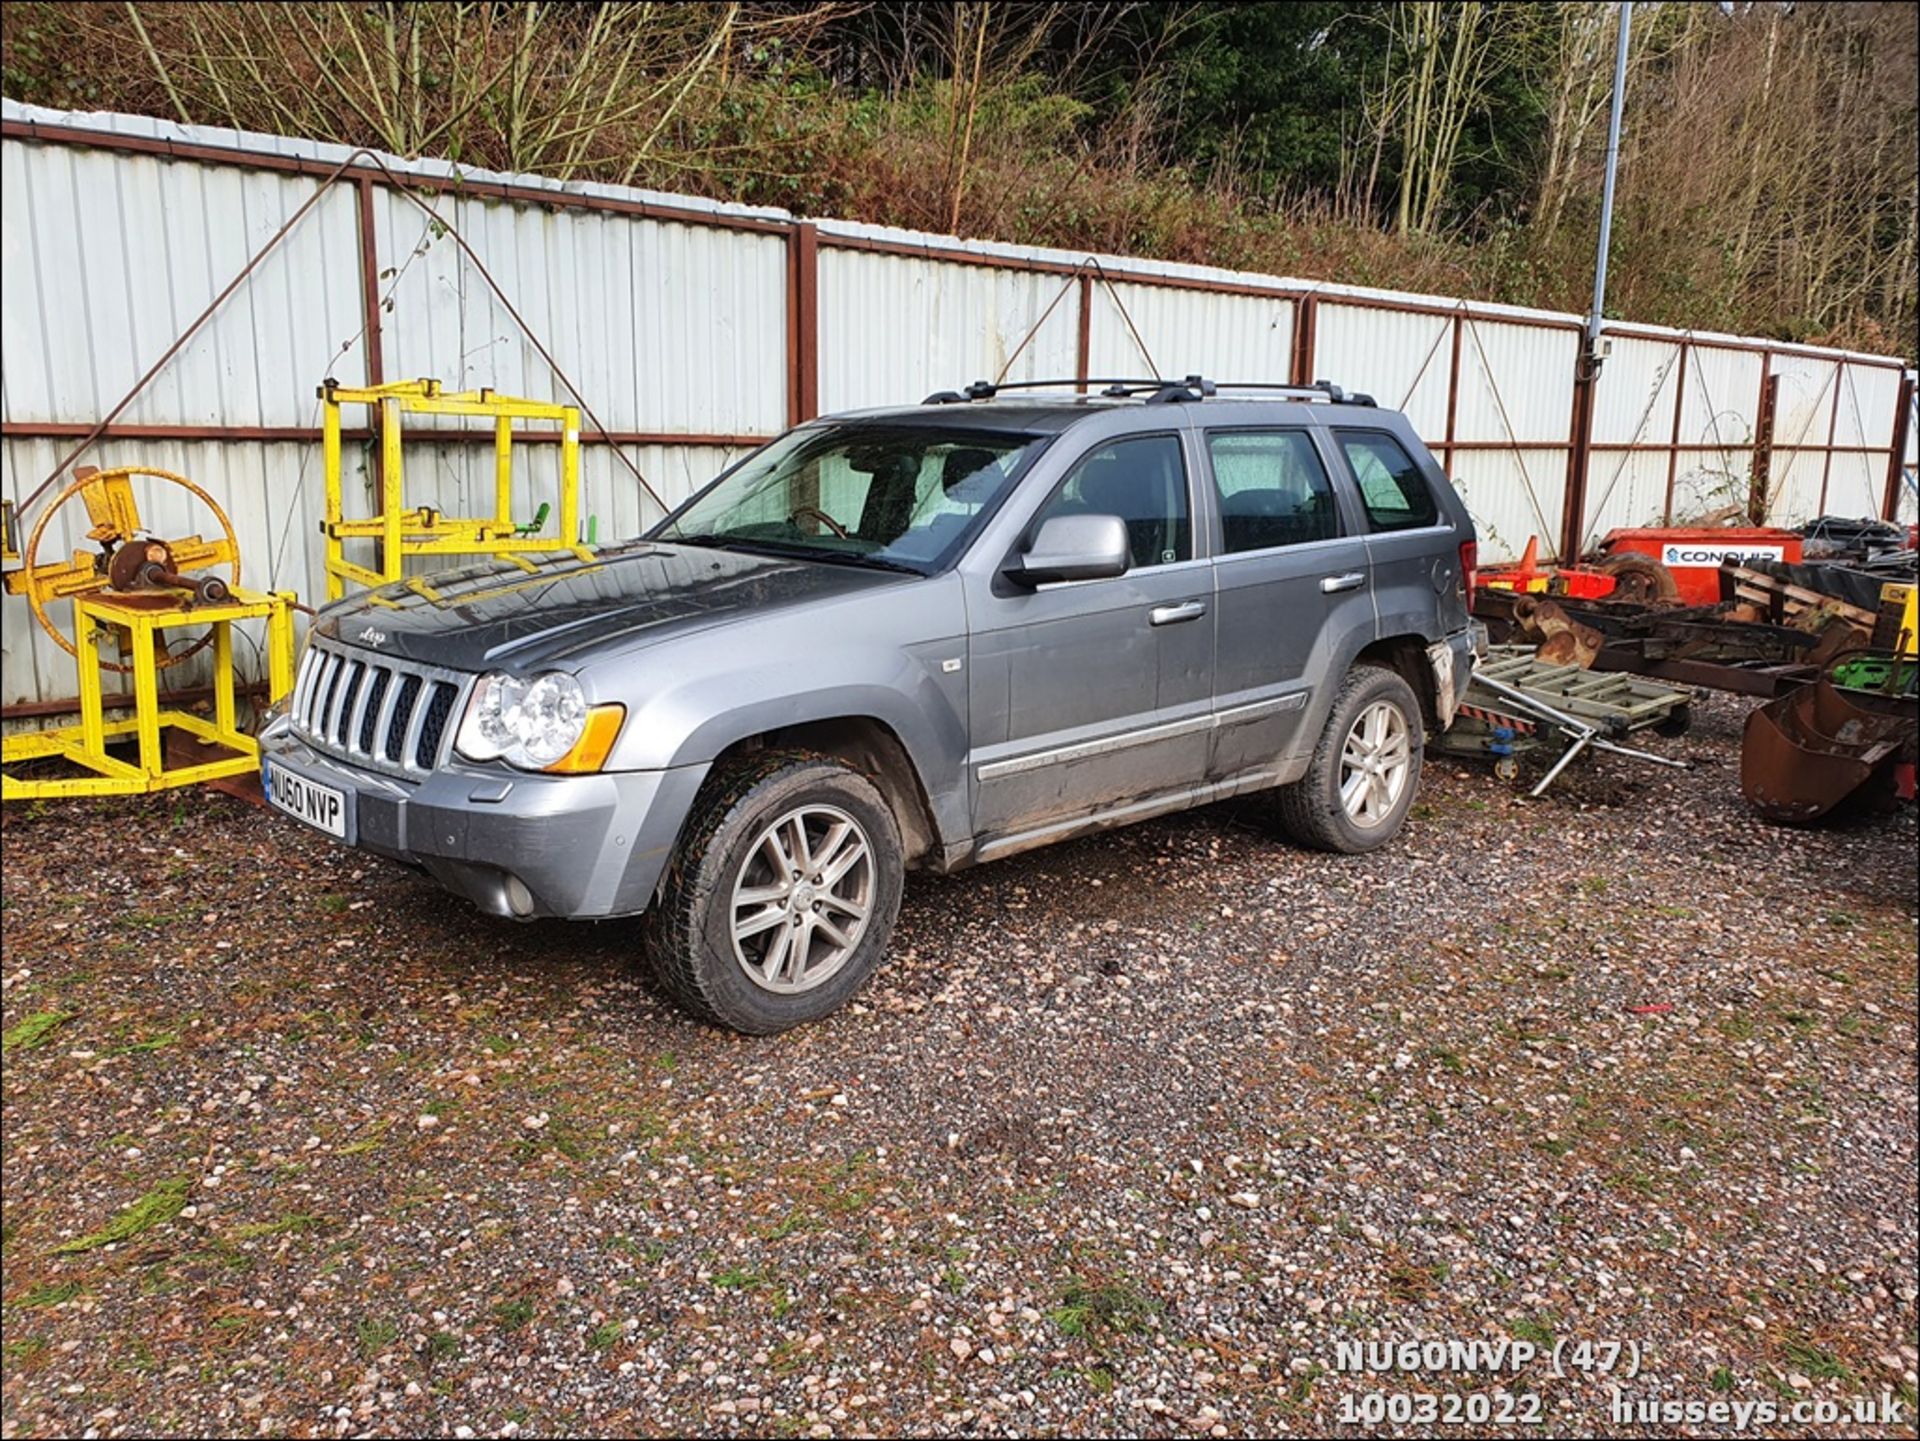 10/60 JEEP G-CHEROKEE OVERLAND CRD A - 2987cc 5dr Estate (Grey, 154k) - Image 47 of 47